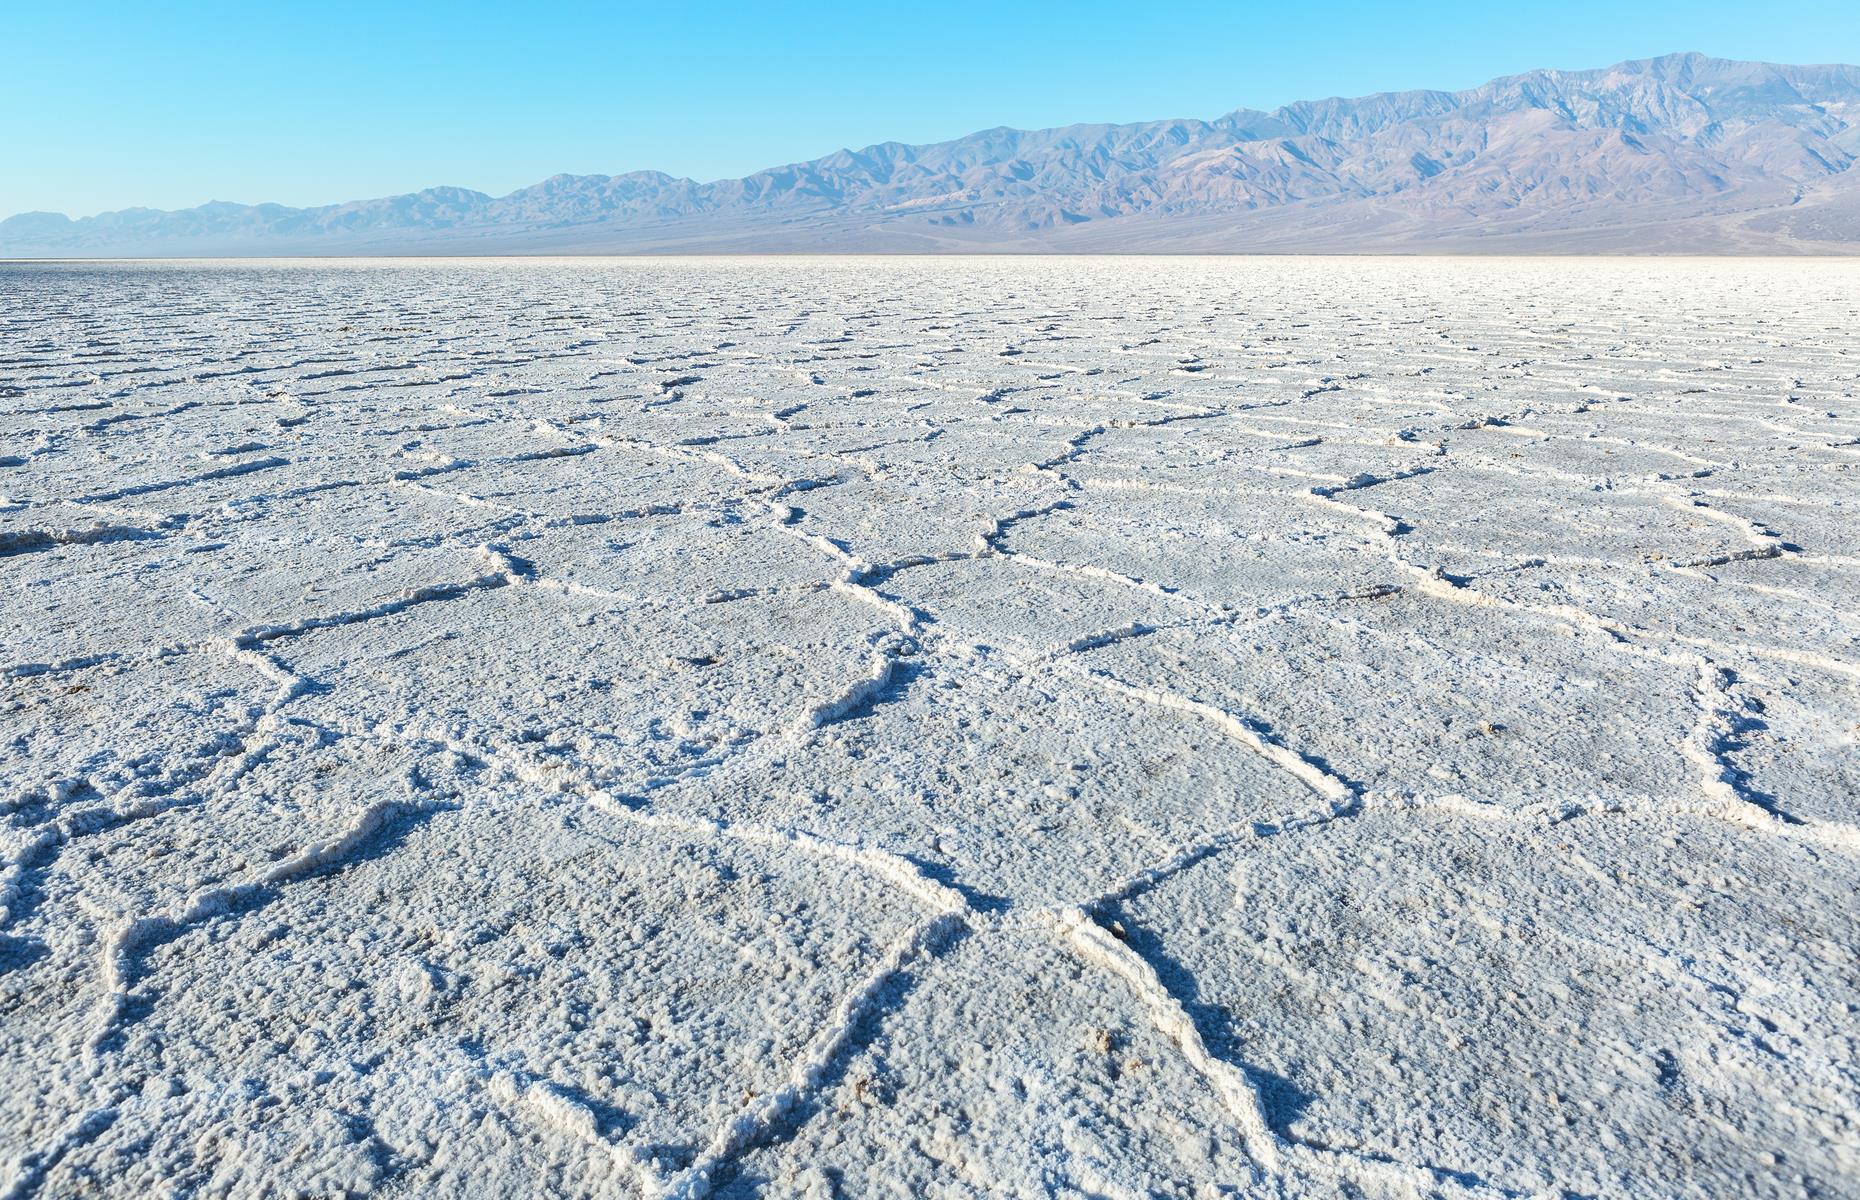 <p>Death Valley’s otherworldly scenery has starred in <em>Star Wars</em> movies and standing on the cracked, crackling salt flats of <a href="https://www.nps.gov/deva/learn/nature/salt-flats.htm">Badwater Basin</a> certainly feels like being in a sci-fi movie. The flats stretch over nearly 200 square miles (520sq km) at the lowest point in North America.</p>